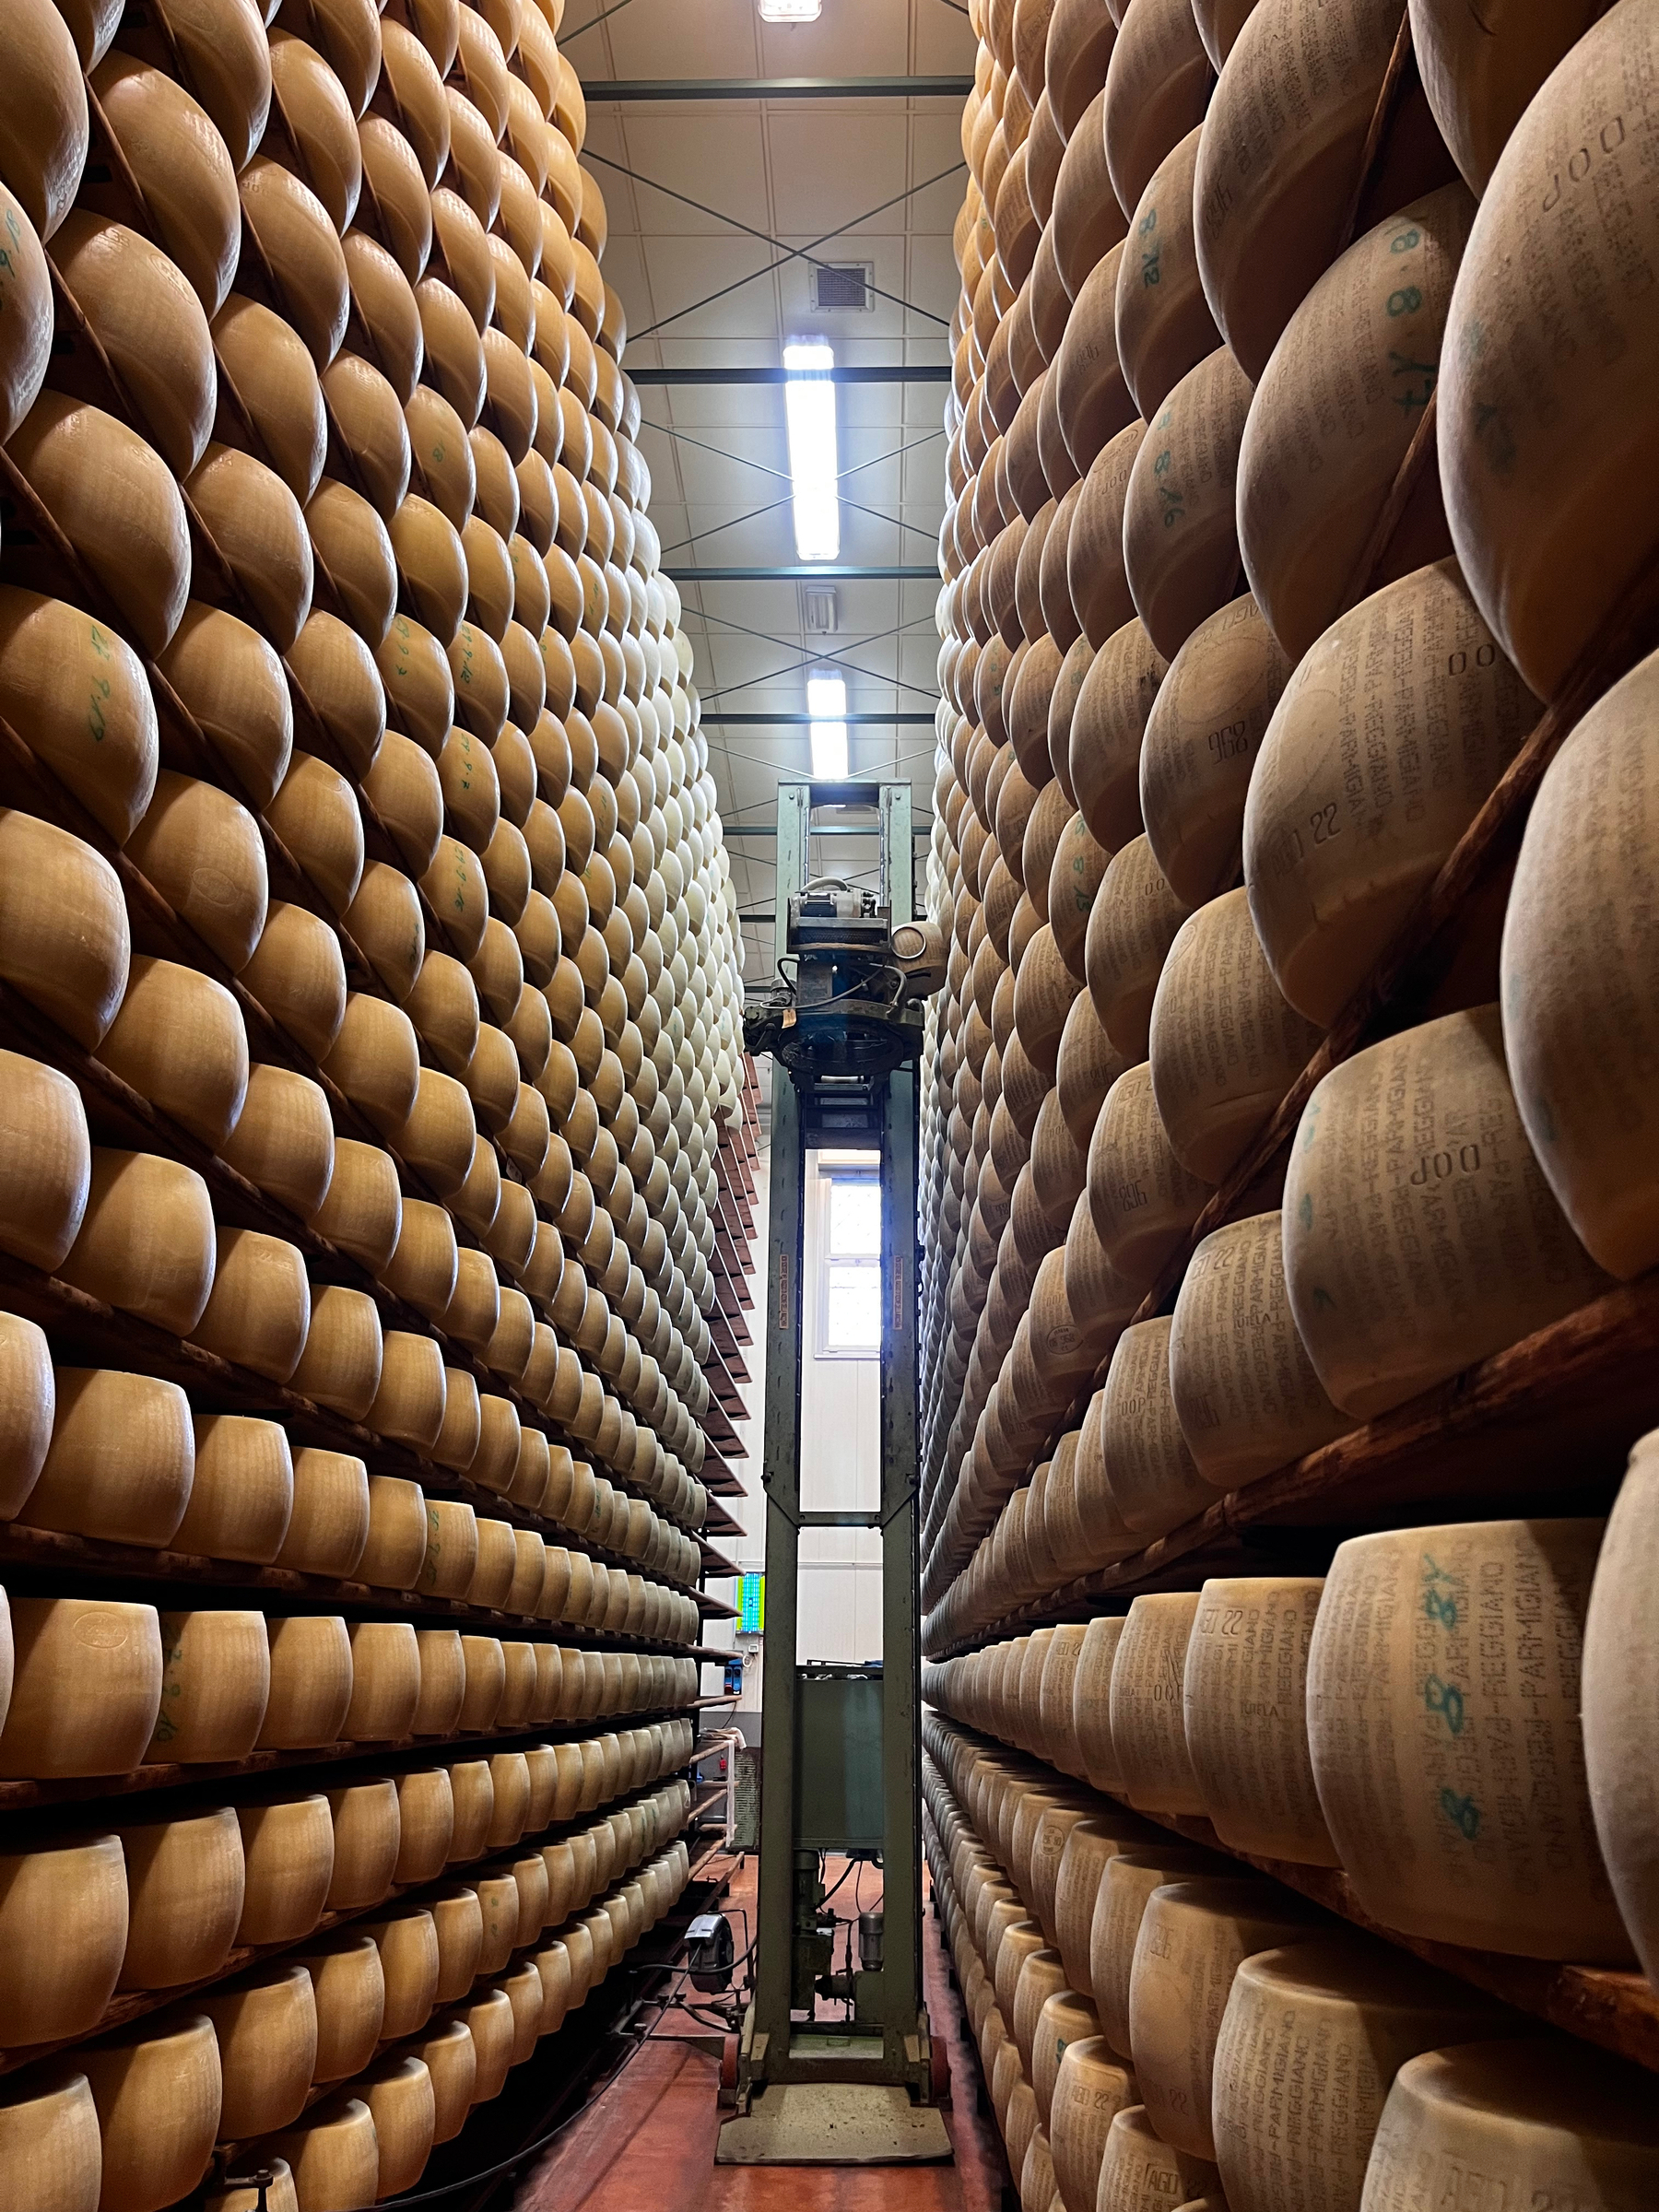 Two rows of Parmesan cheese waiting their turn to be cleaned by an automated machine that works its way along the rows of cheeses